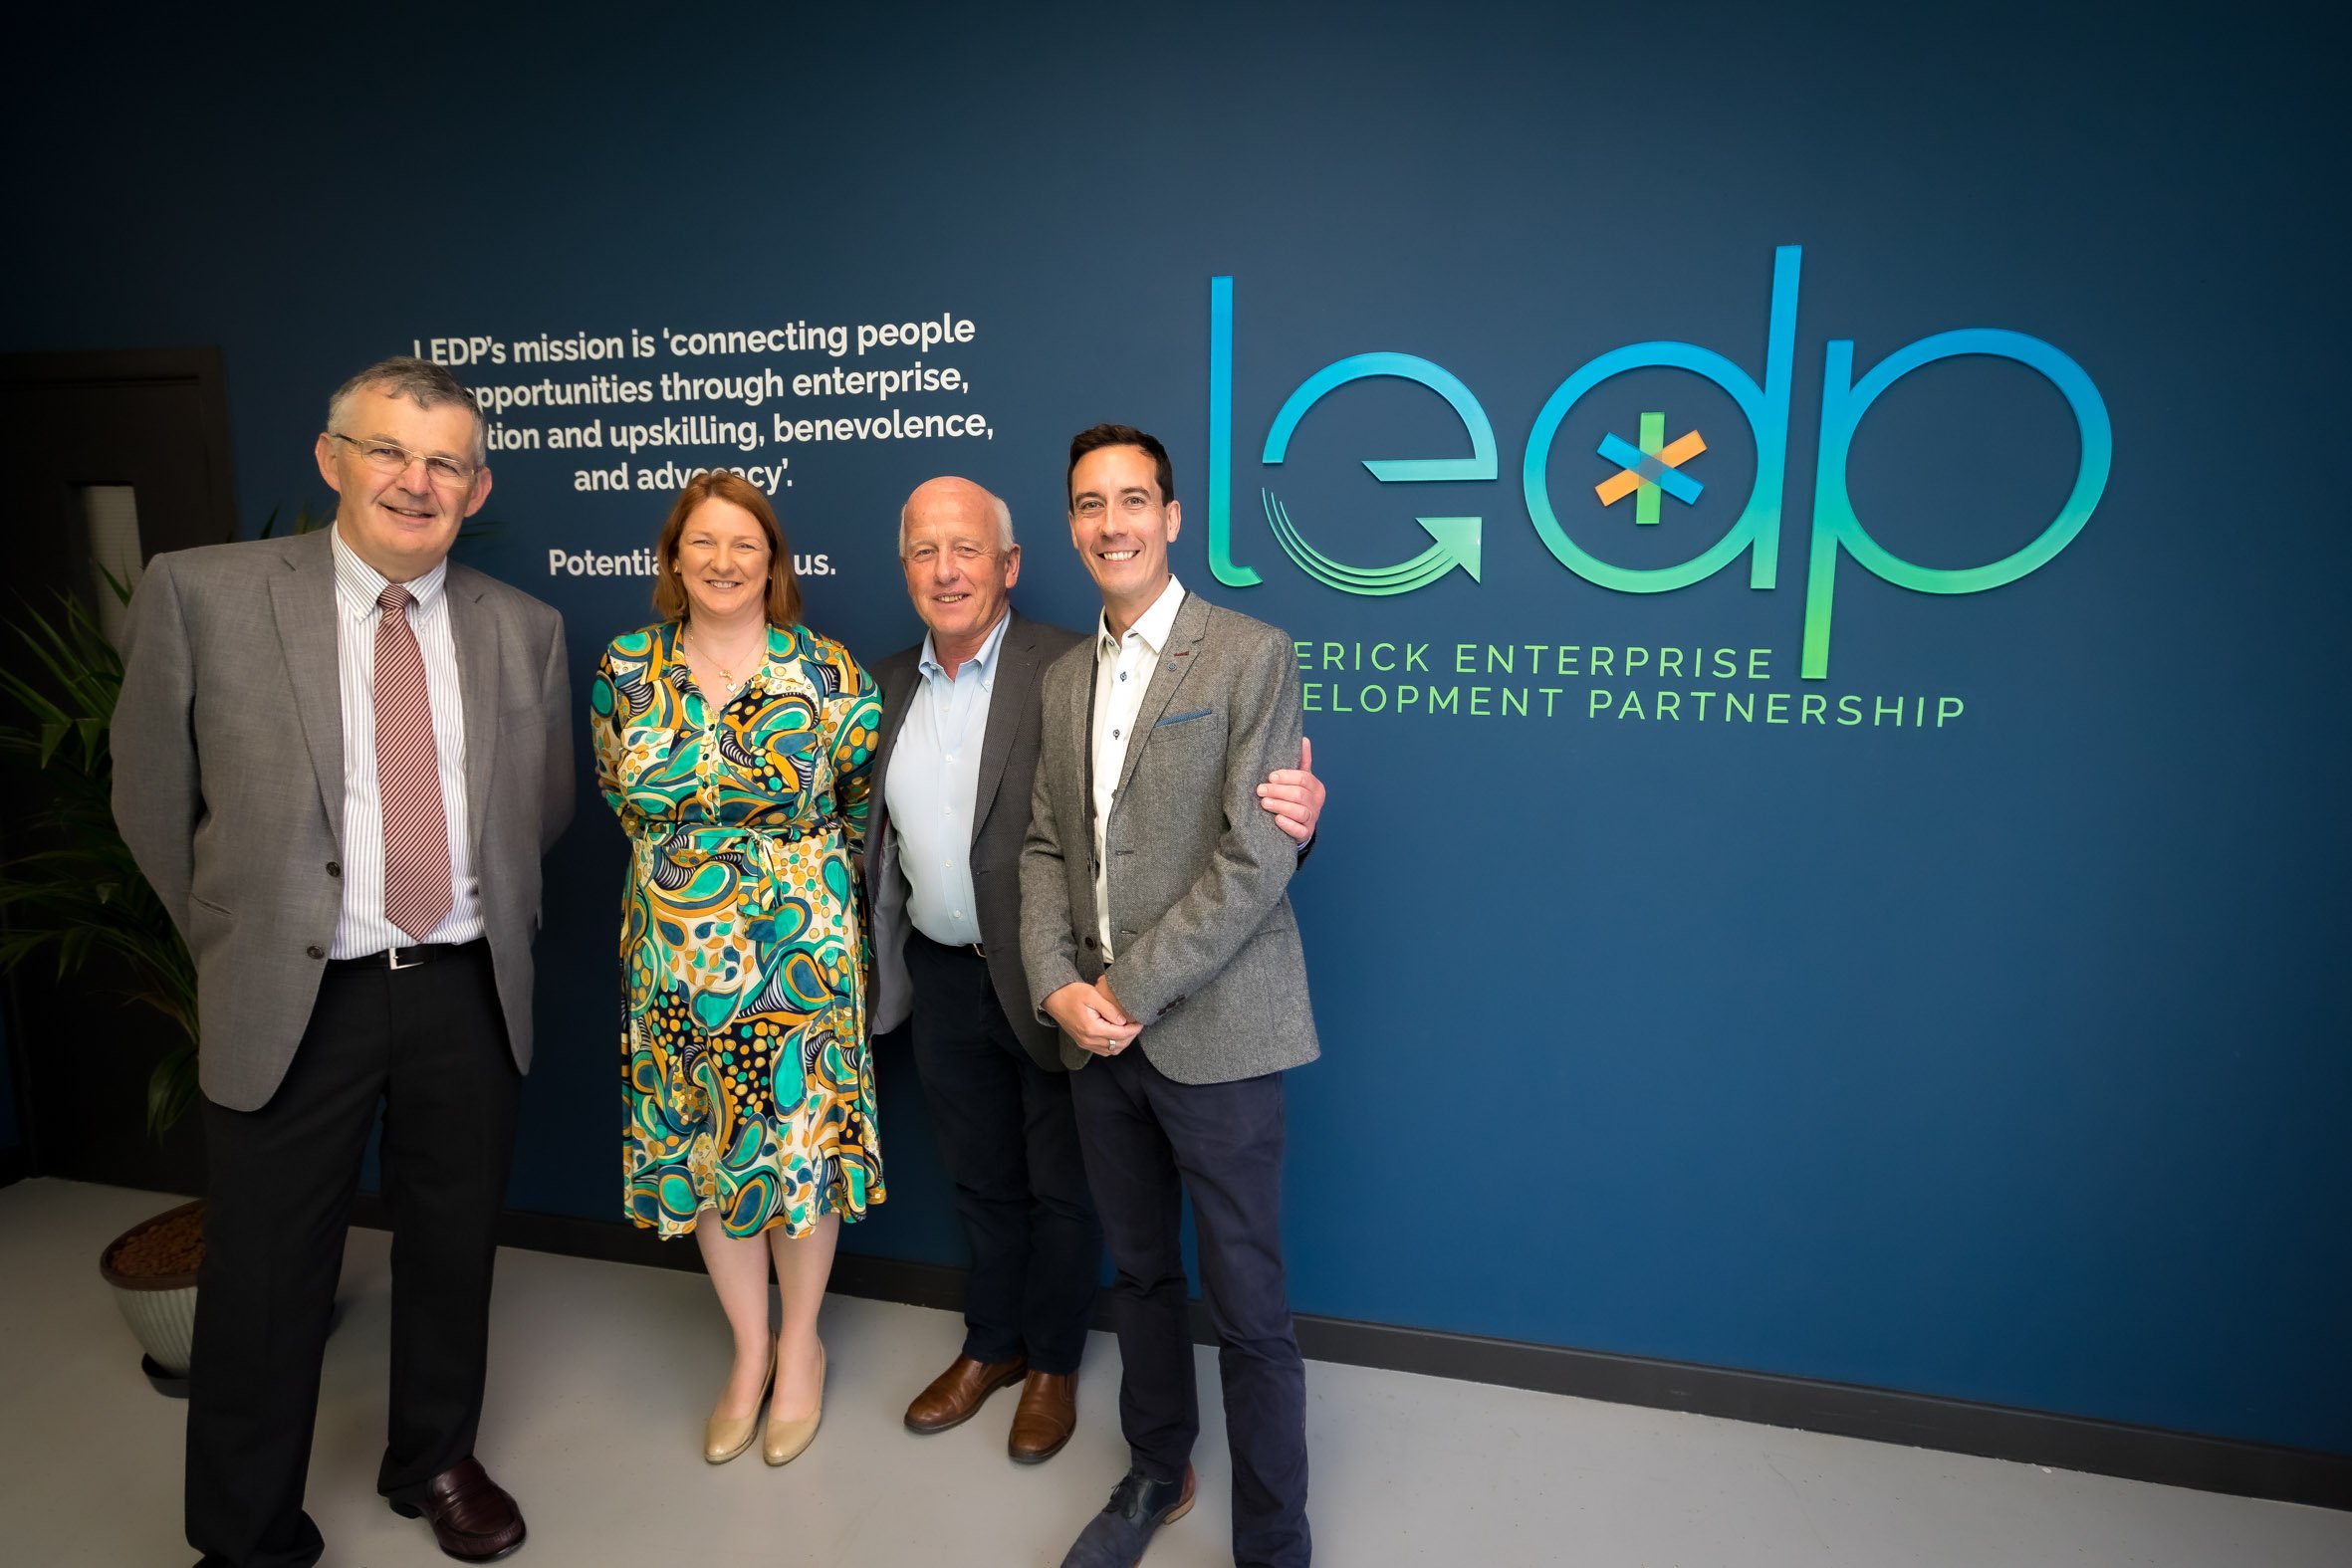 19-05-2022 LEDP, Spark Hub opening by Minister for Further and Higher Education, Simon Harris pictured with Niall O'Callaghan, Chief Executive at Limerick Enterprise Development Partnership (LEDP).   Picture: Keith Wiseman